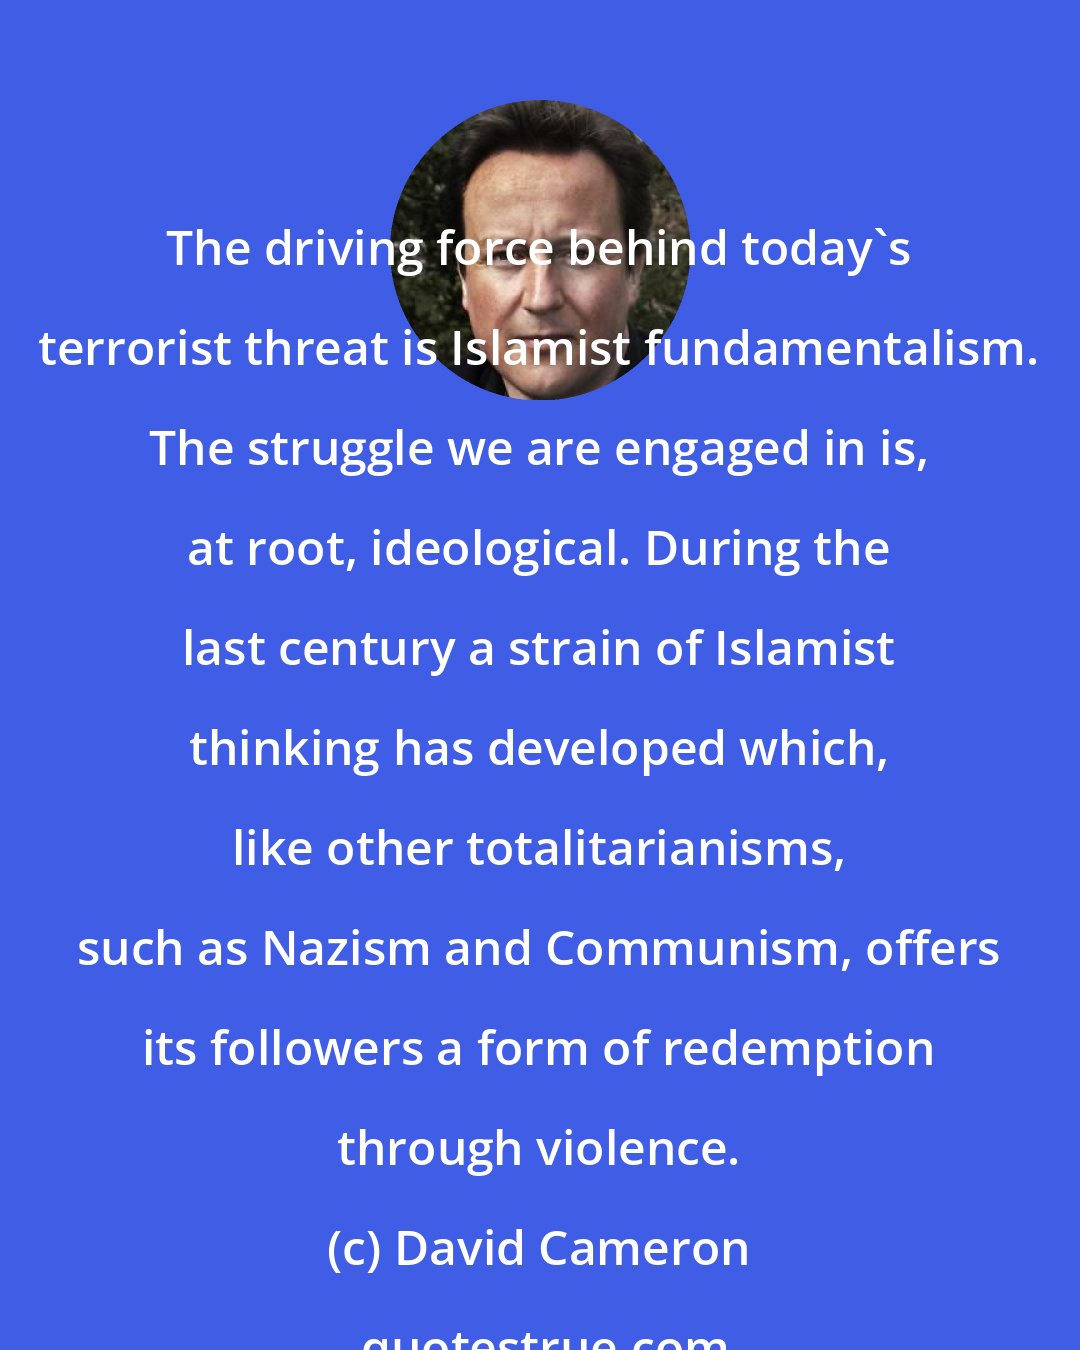 David Cameron: The driving force behind today's terrorist threat is Islamist fundamentalism. The struggle we are engaged in is, at root, ideological. During the last century a strain of Islamist thinking has developed which, like other totalitarianisms, such as Nazism and Communism, offers its followers a form of redemption through violence.